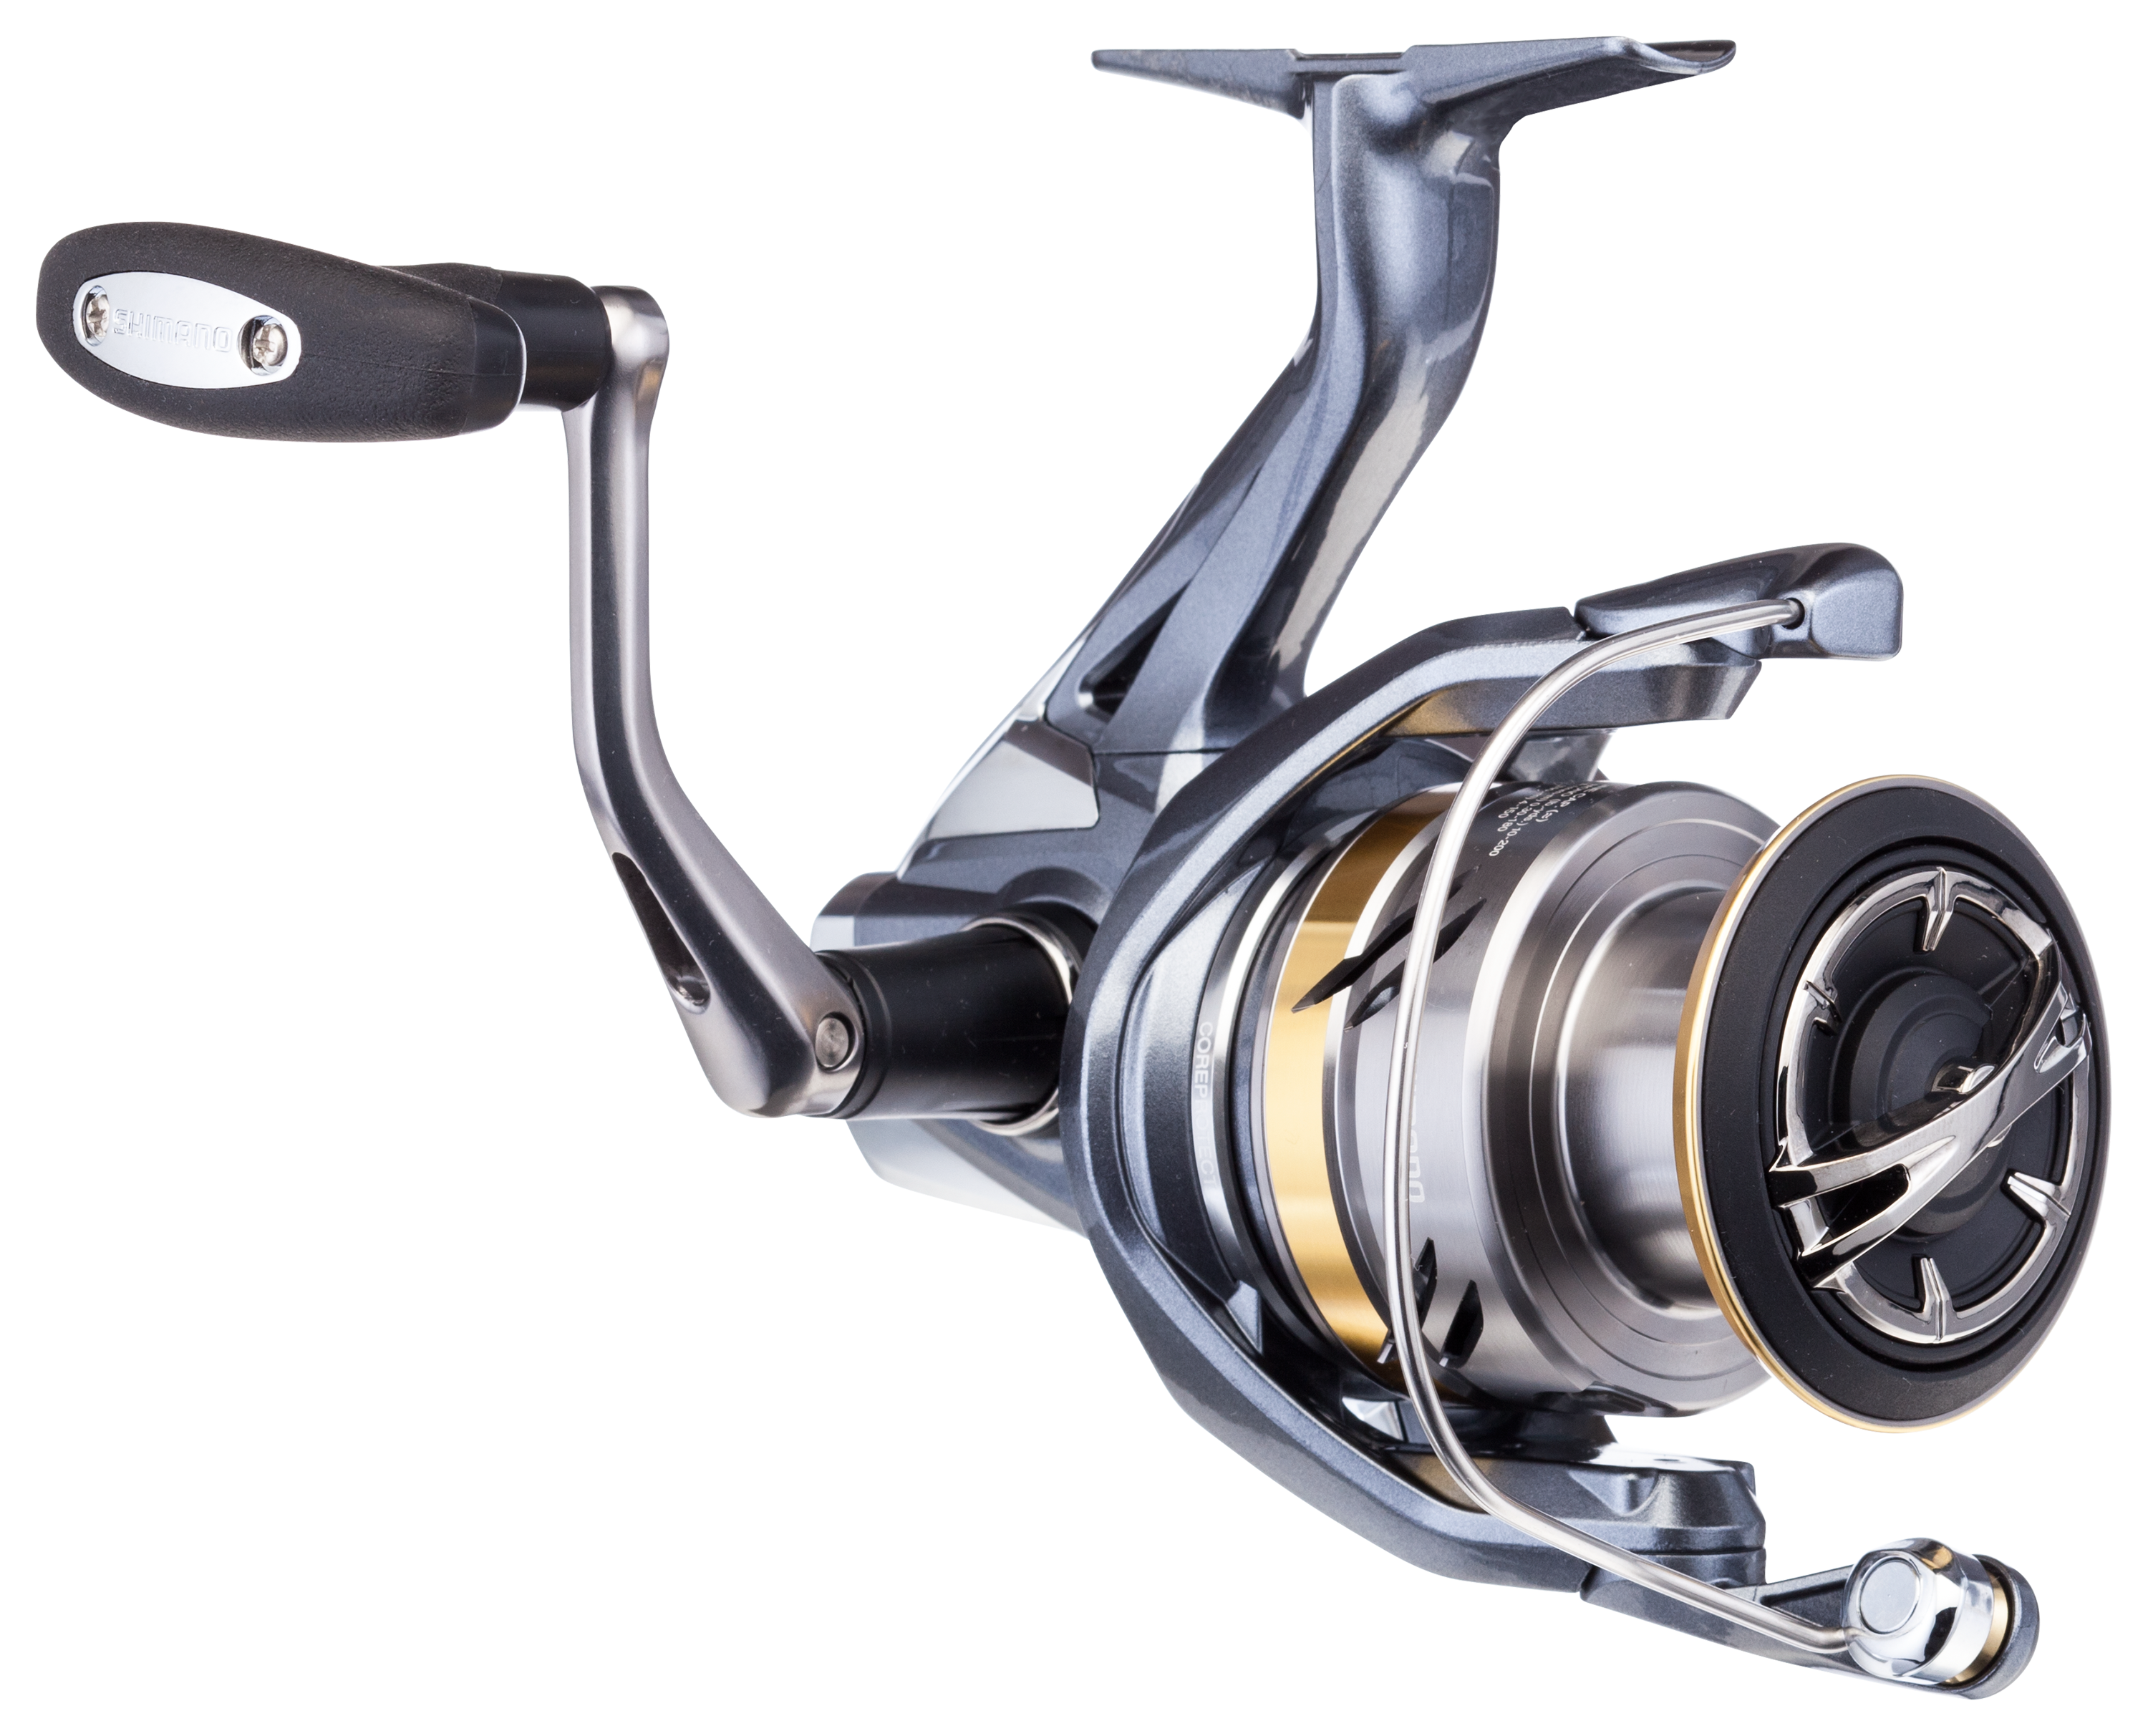 SHIMANO 17 ULTEGRA 4000 Spinning Reel Used Body only with Box From Japan  F/S - Pioneer Recycling Services